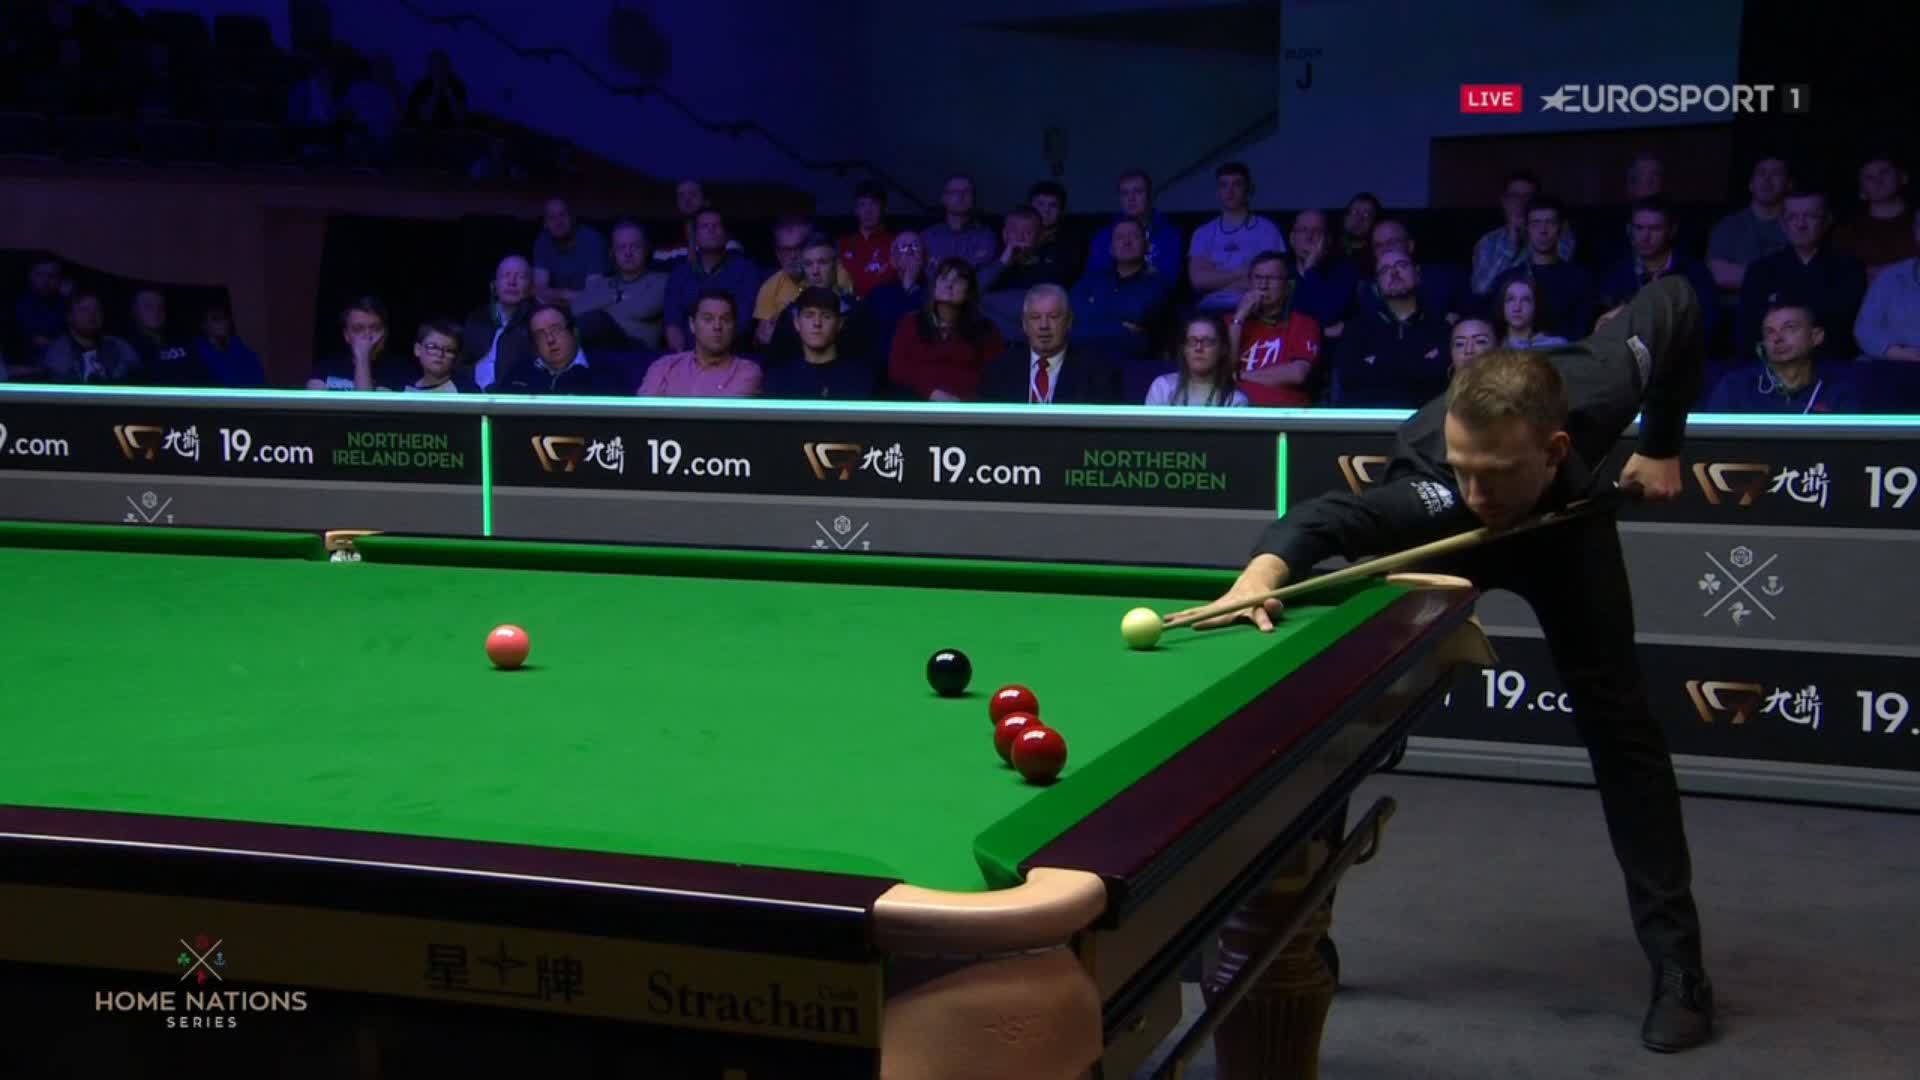 ophøre support negativ Eurosport on Twitter: "#BestOf2019 Shot of the tournament? ✔️ Shot of the  year? ✔️ Shot of the decade? ✔️ @judd147t = Cue ball puppeteer  https://t.co/WF33ZjfpYo" / Twitter